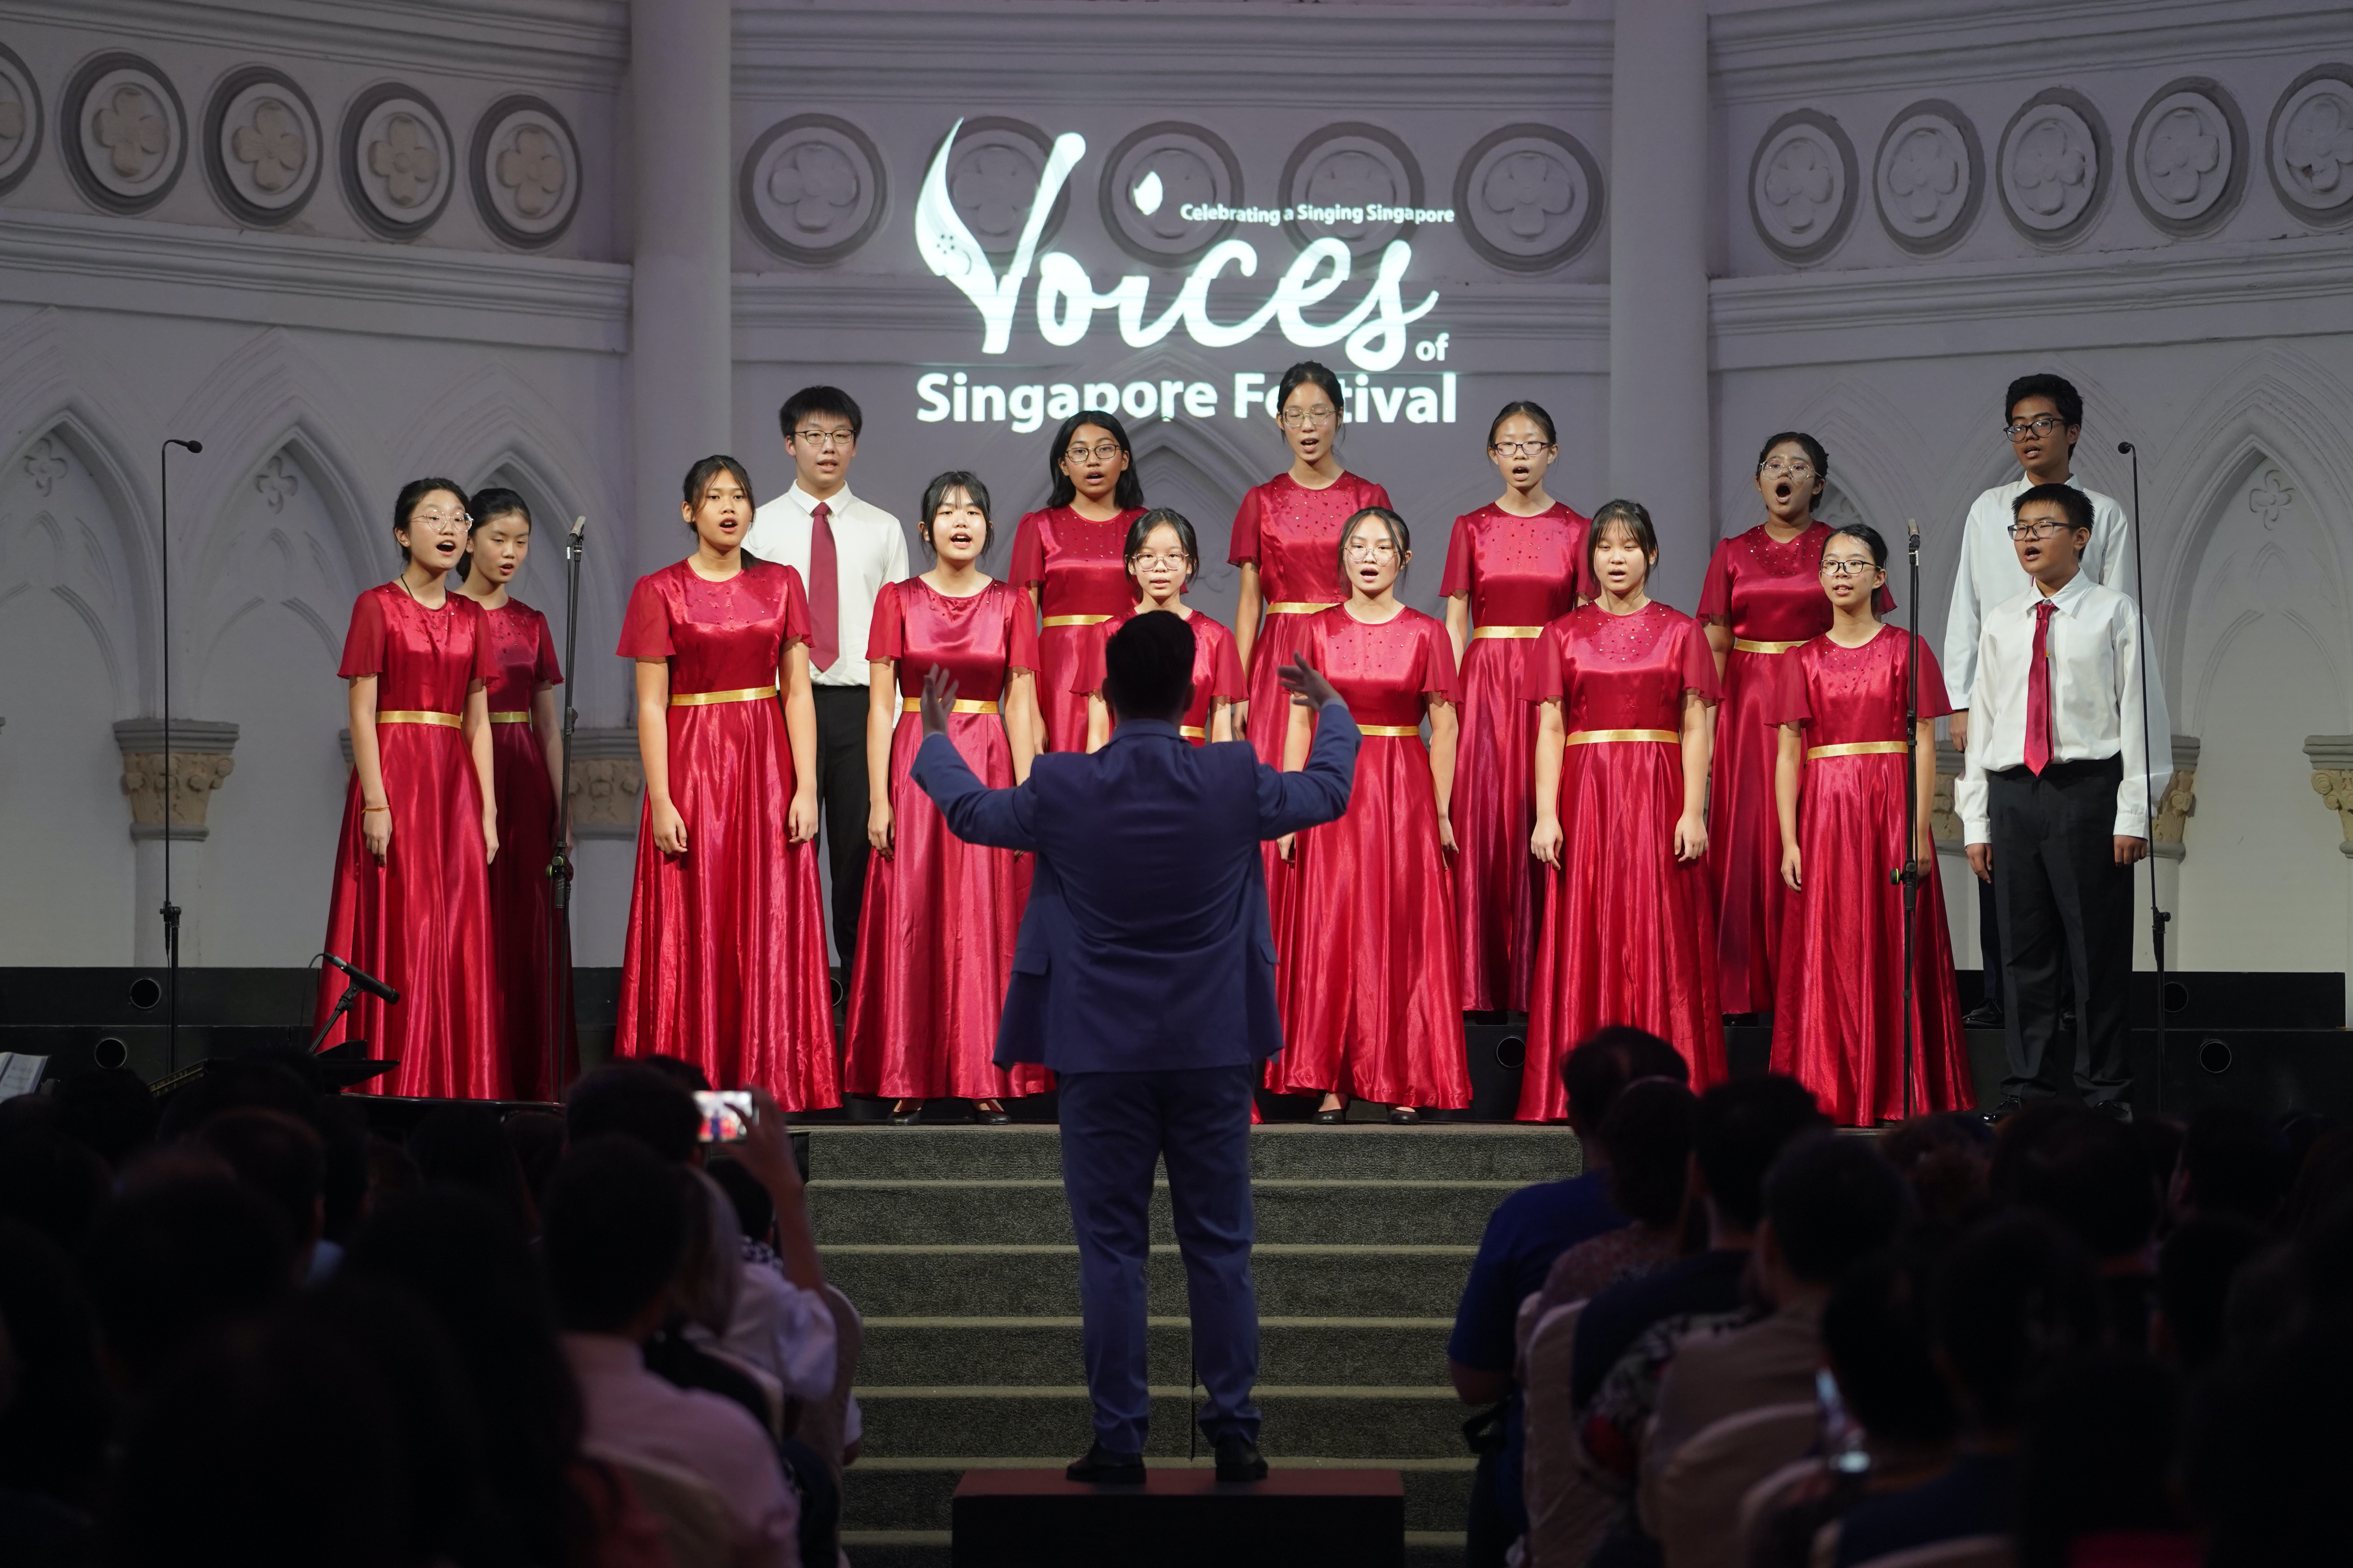 Voices of Singapore